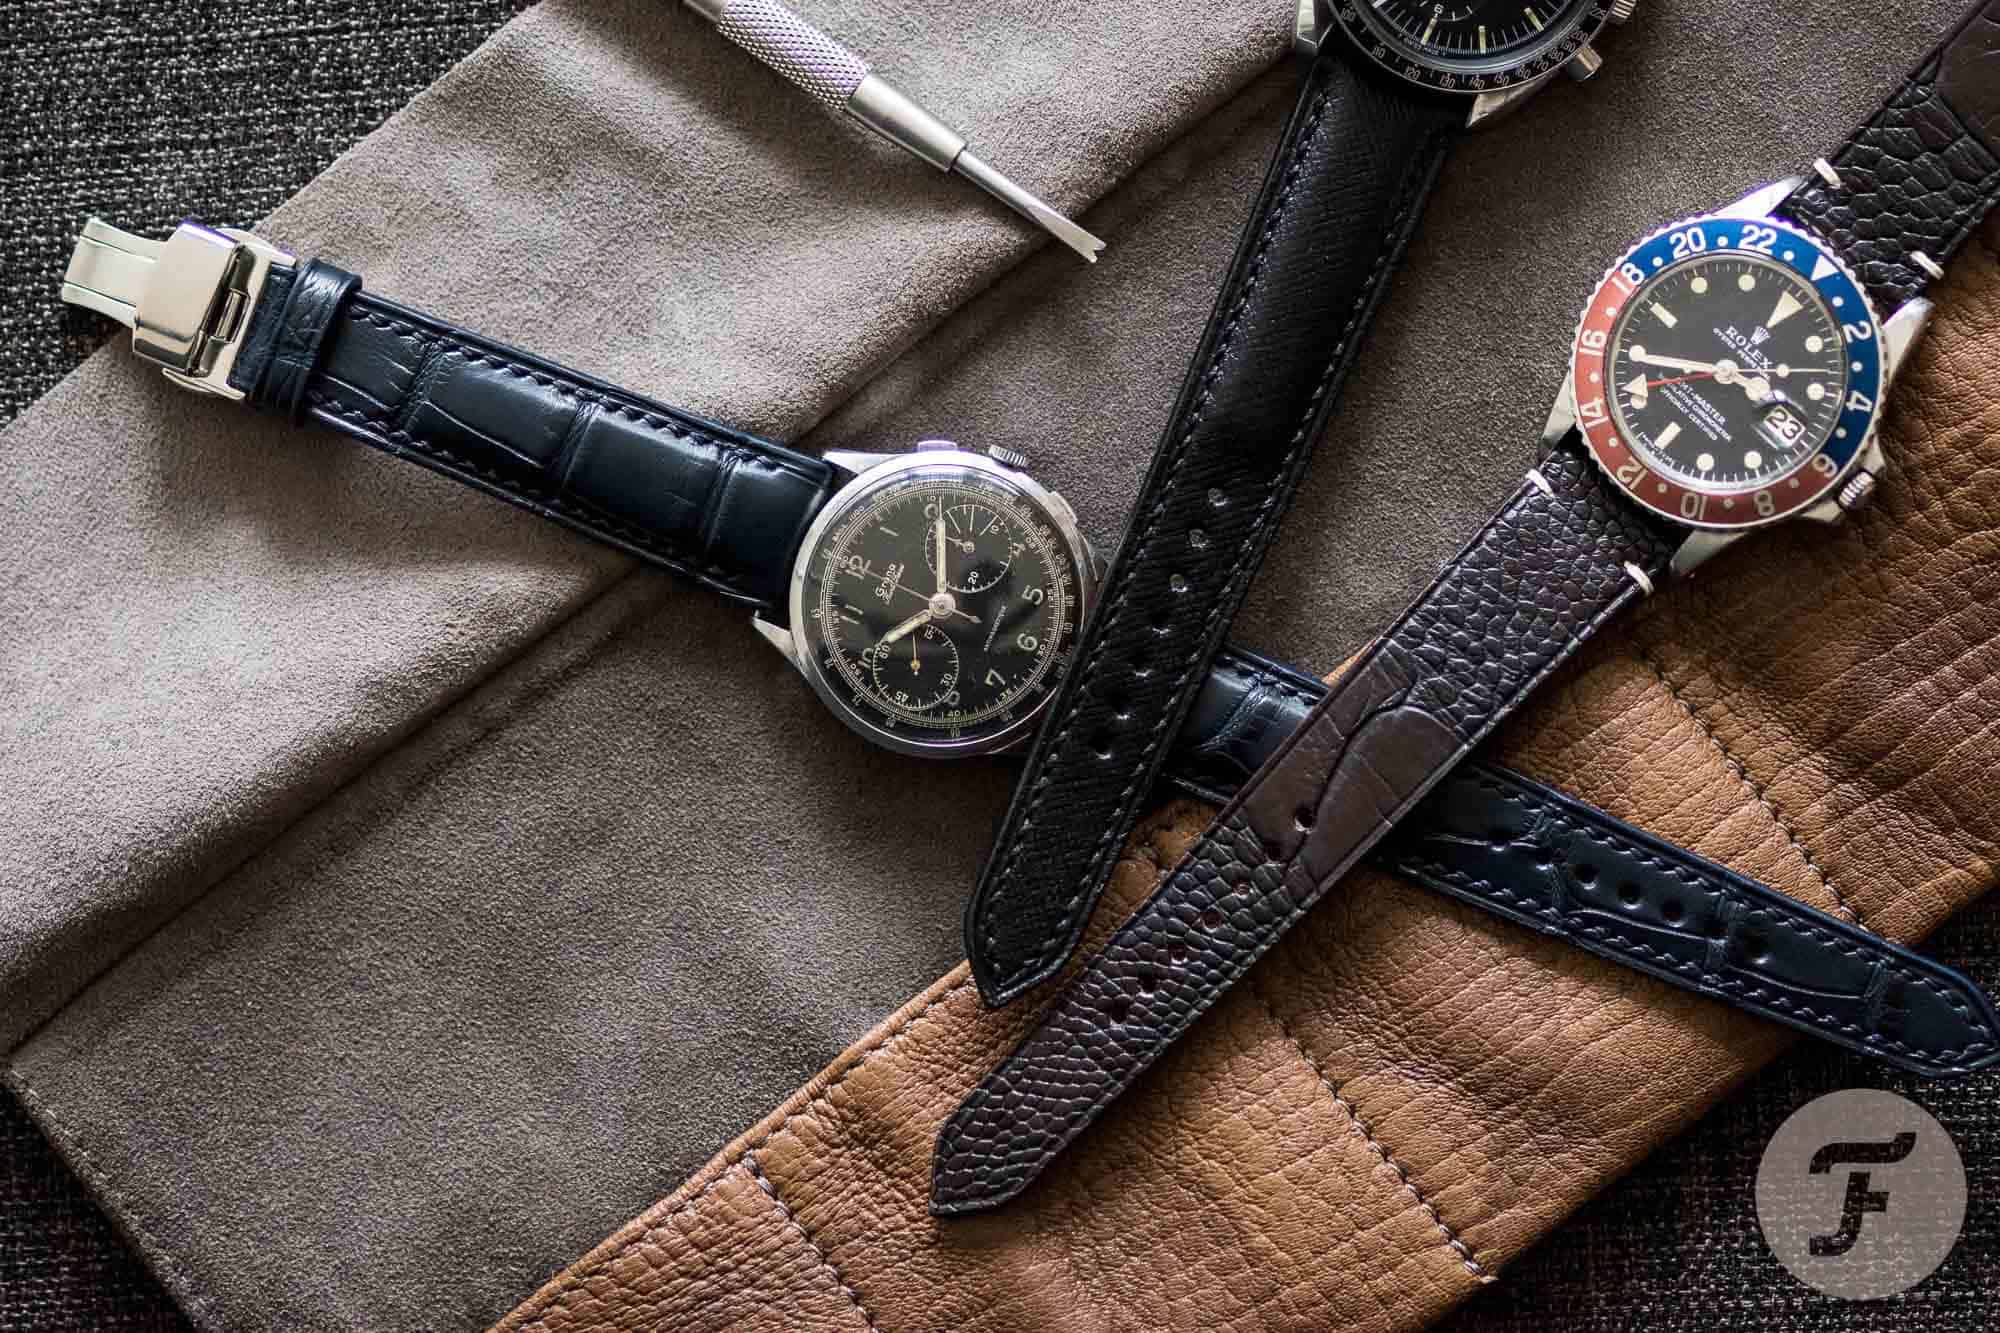 Types of watch straps